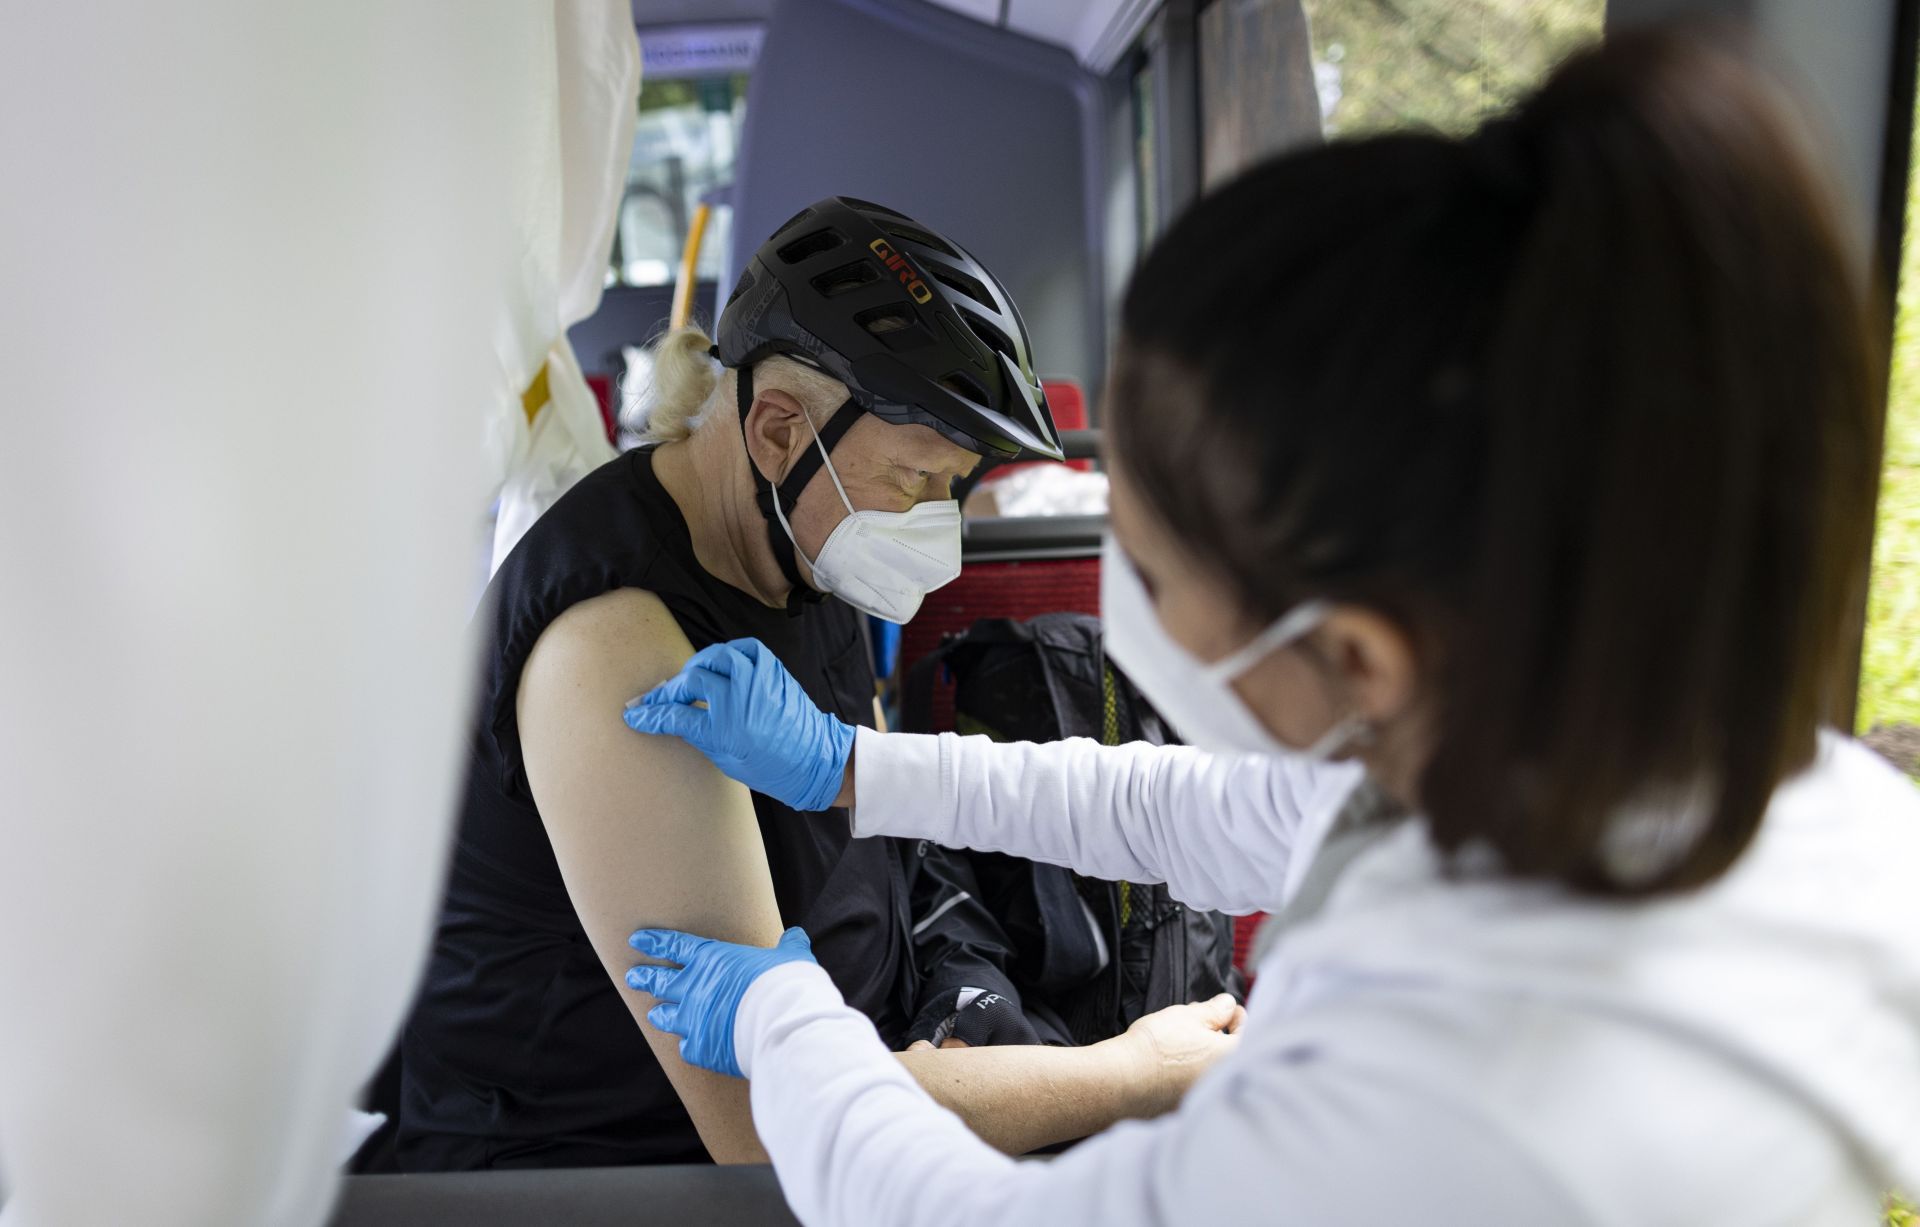 Vaccination drives carried out by clubs can be an effective way of increasing vaccination rates, even among the common public